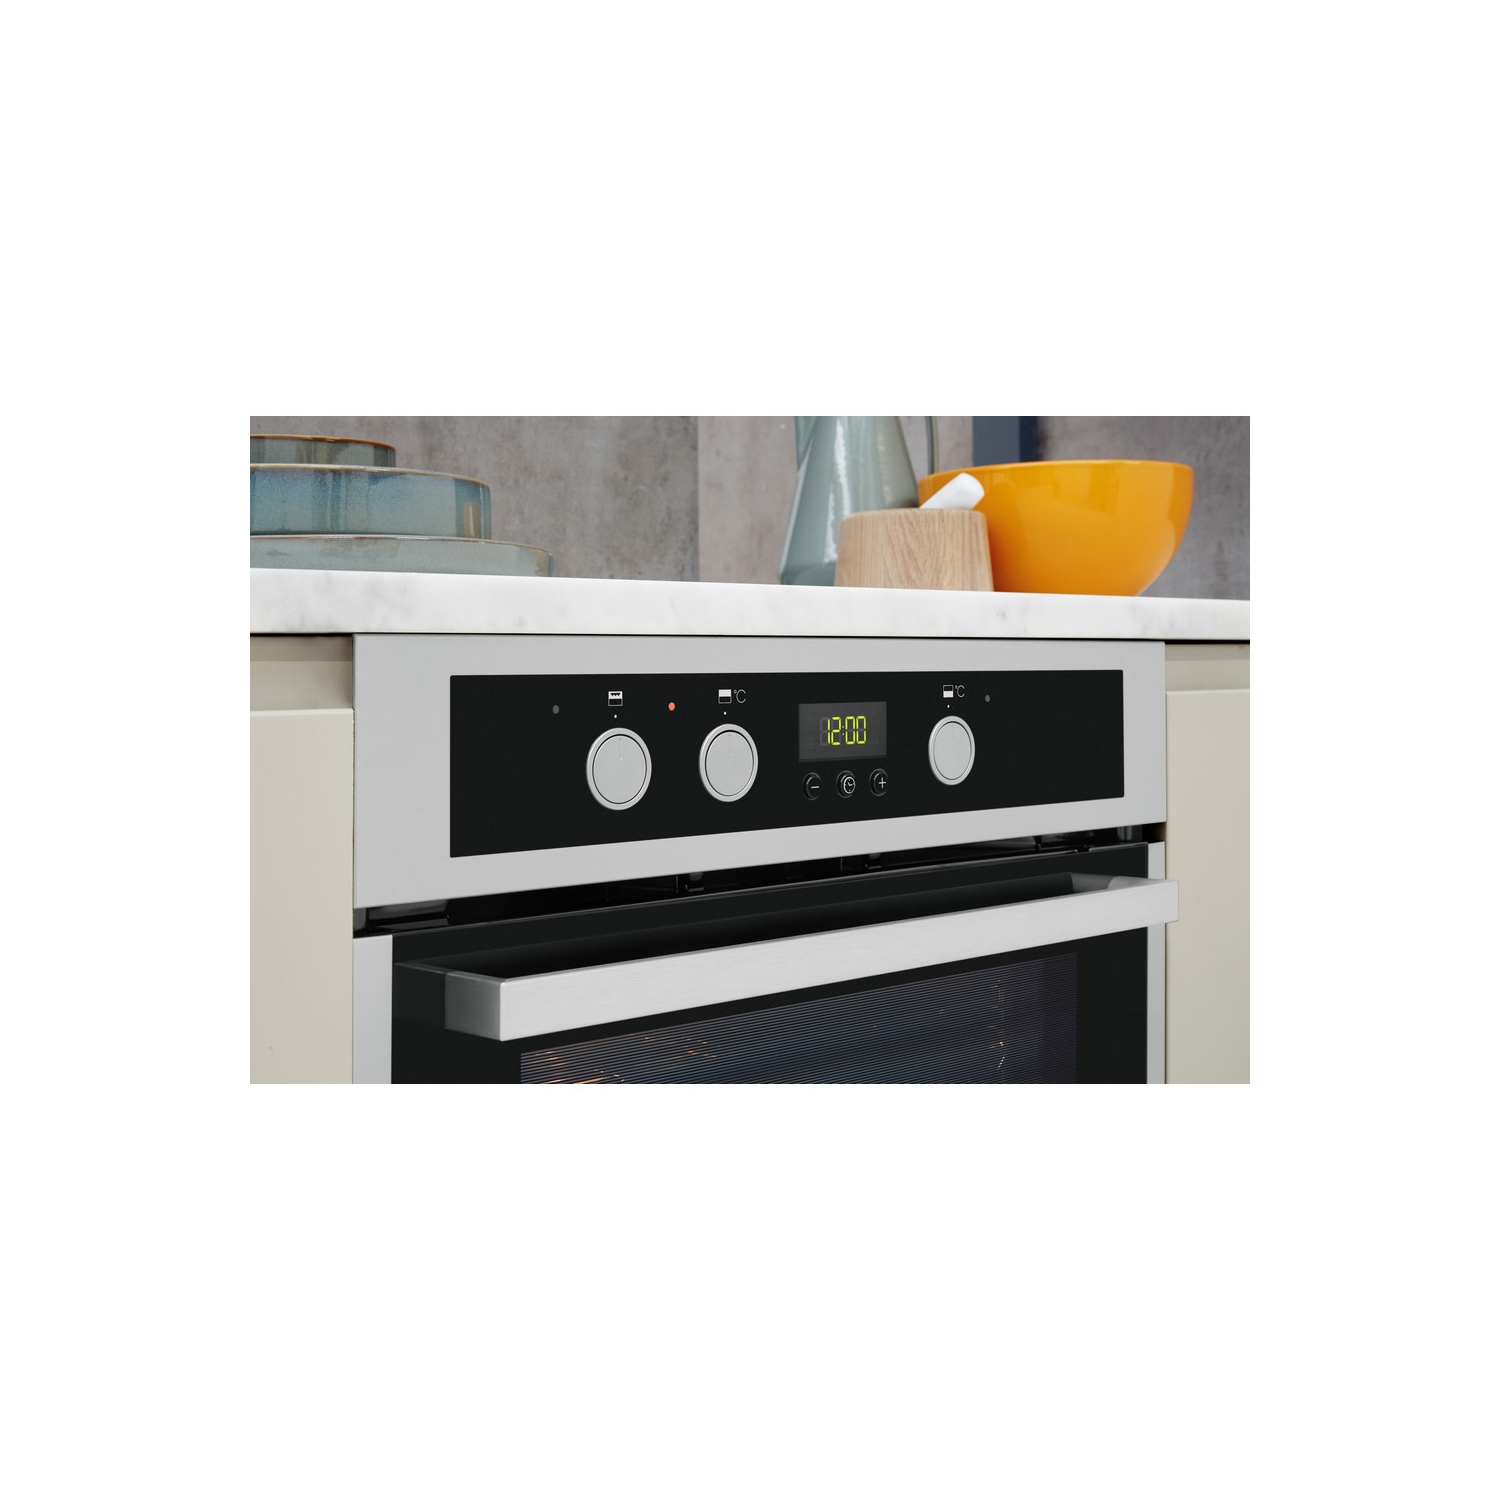 Whirlpool 60cm Built-Under Electric Oven - Stainless Steel - A Rated - 6